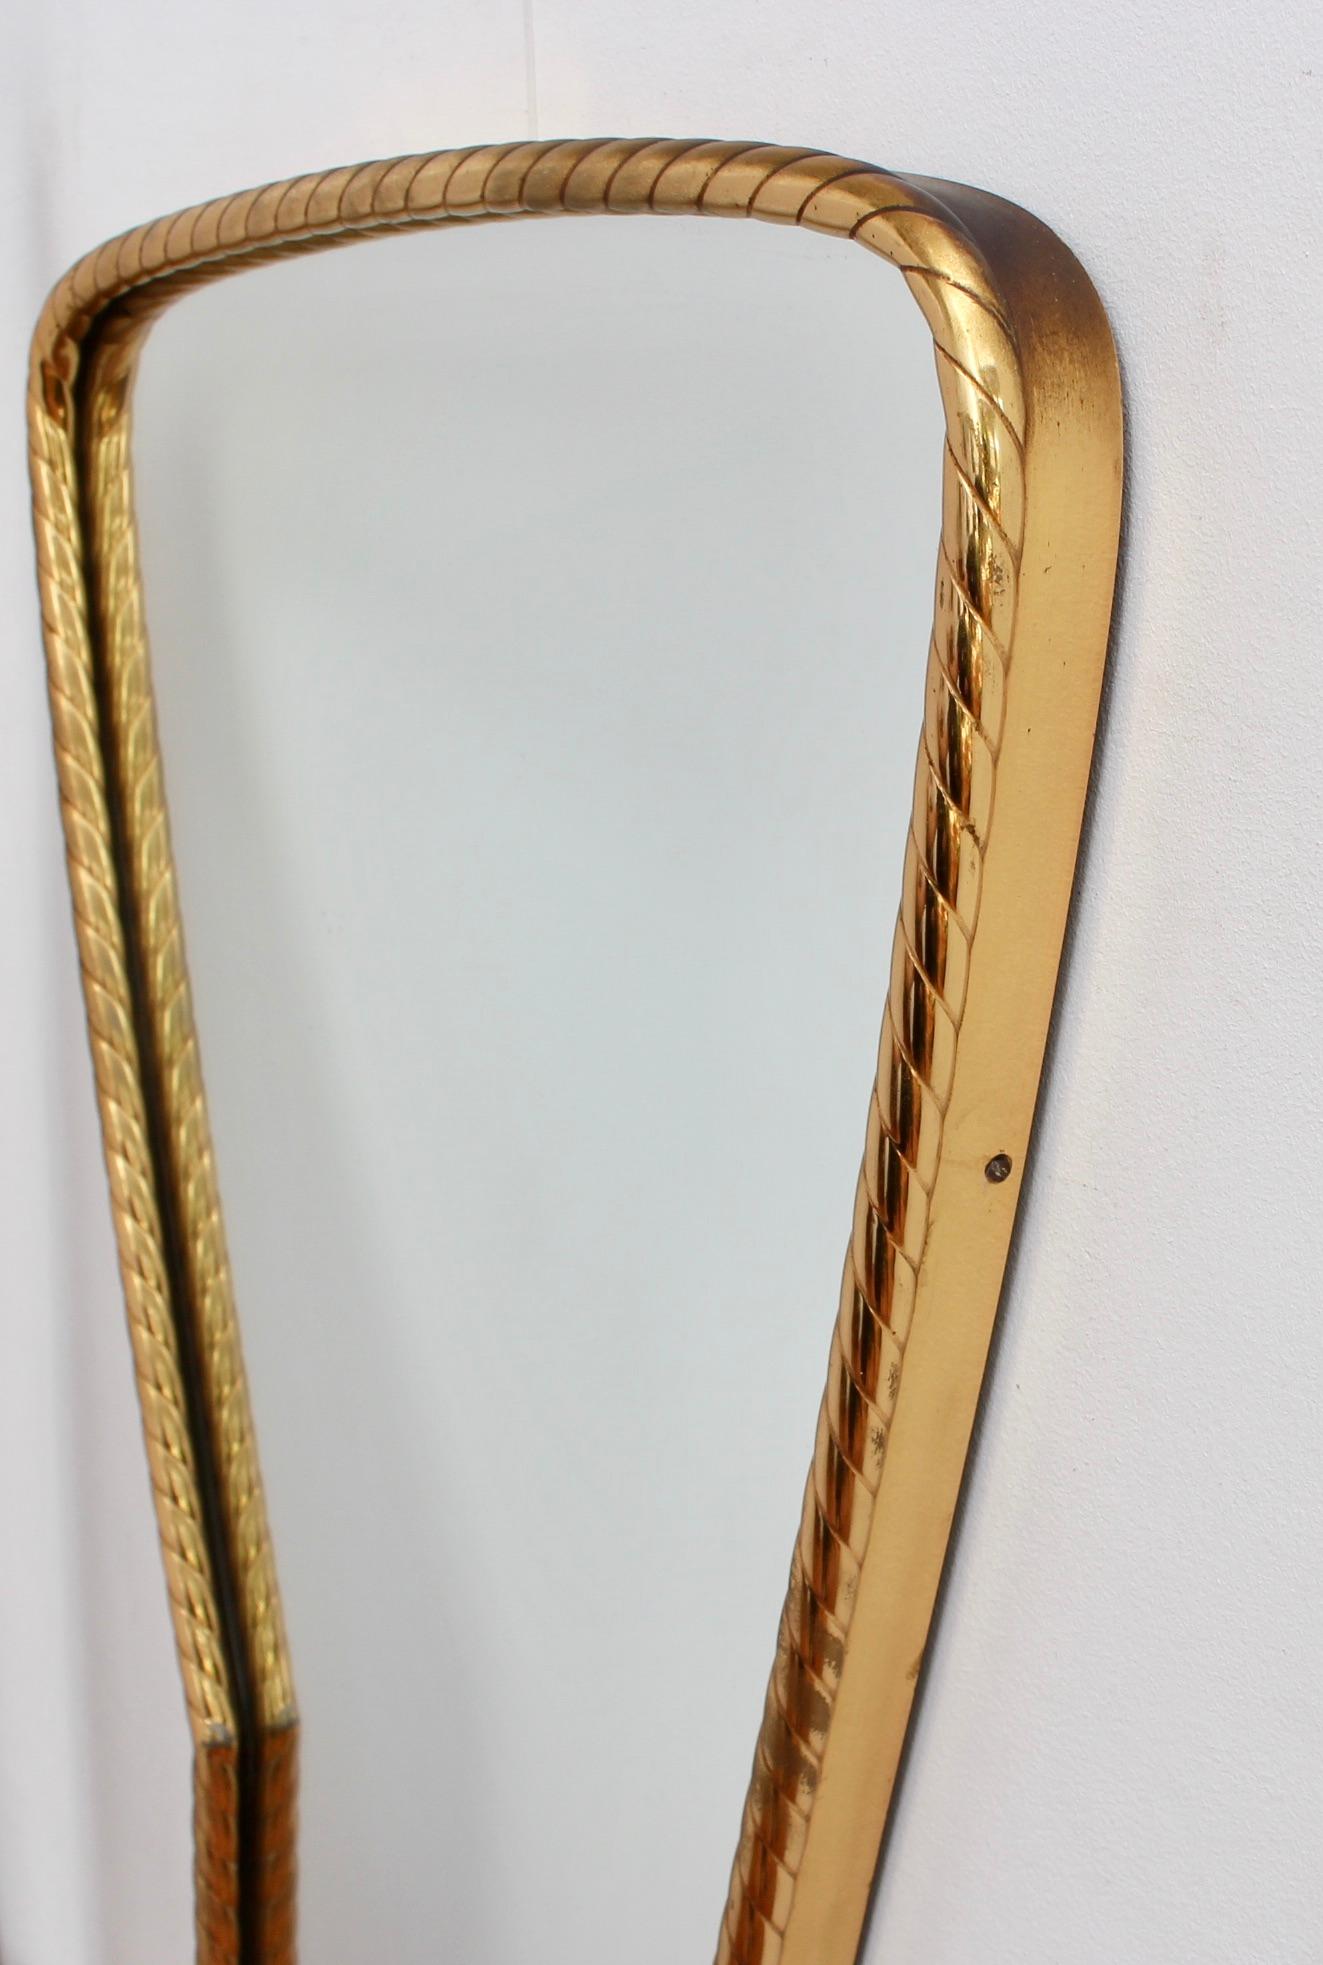 Midcentury Italian Keyhole-Shaped Wall Mirror with Rope Pattern Brass Frame 5